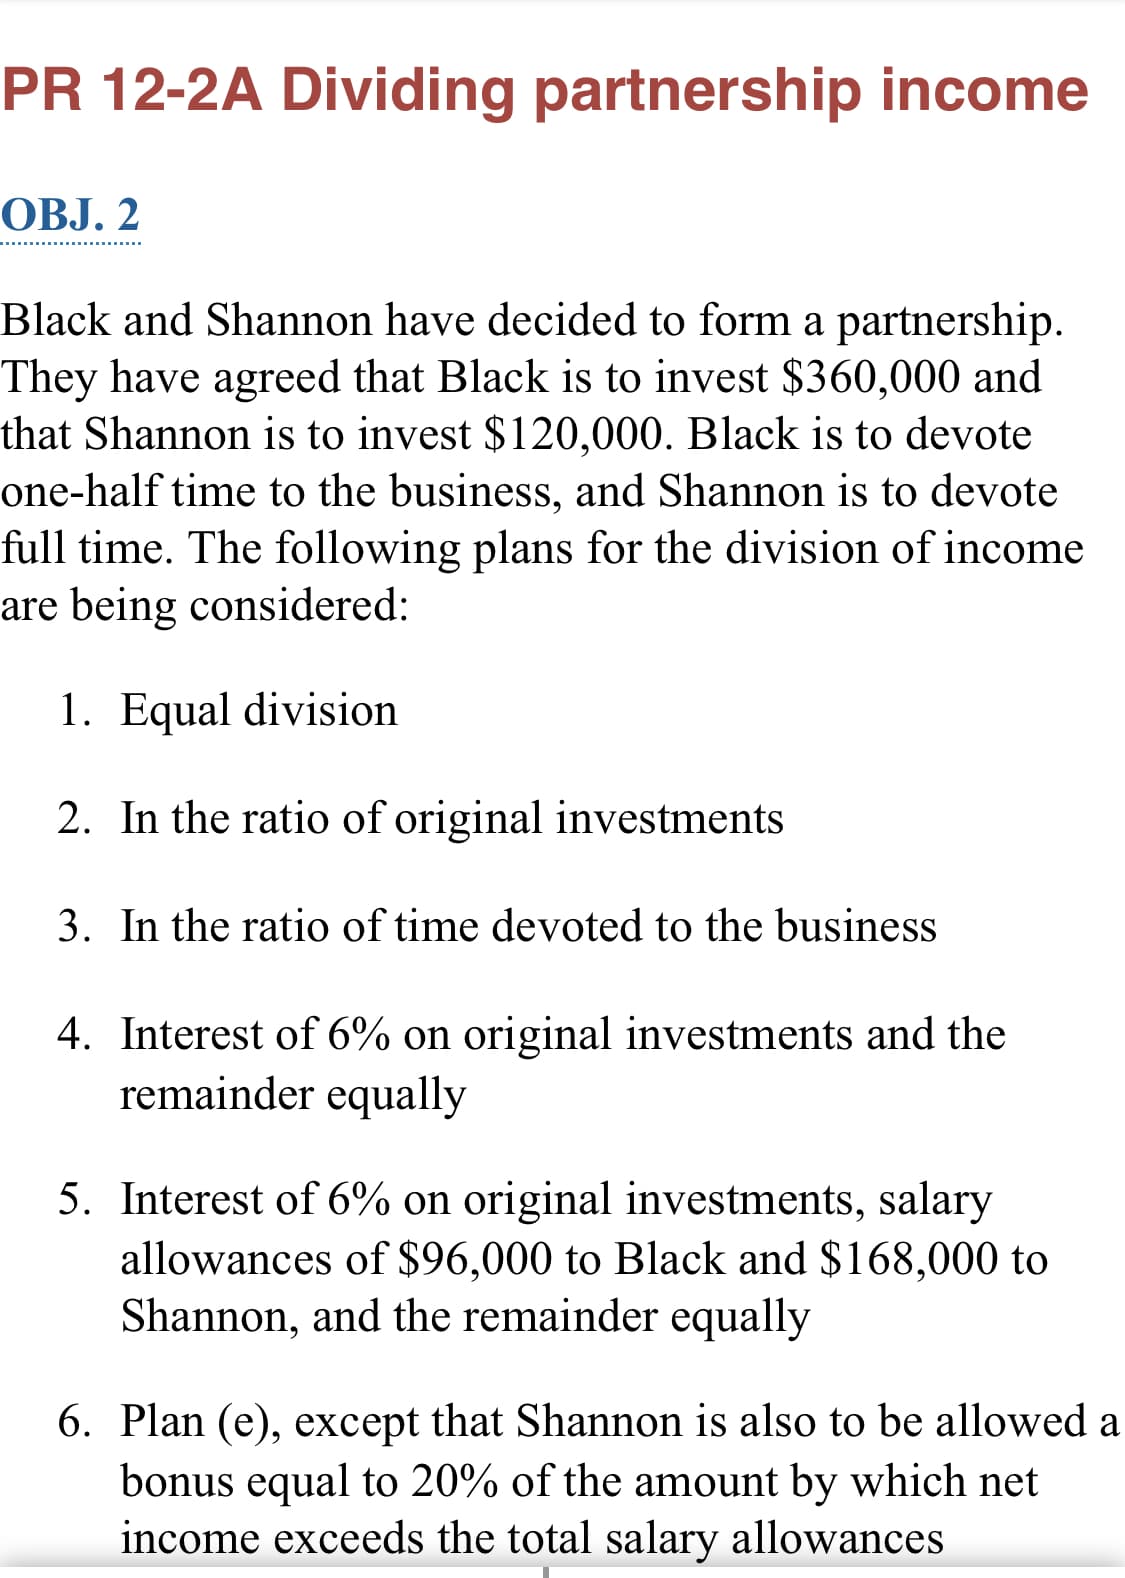 PR 12-2A Dividing partnership income
OBJ. 2
Black and Shannon have decided to form a partnership.
They have agreed that Black is to invest $360,000 and
that Shannon is to invest $120,000. Black is to devote
one-half time to the business, and Shannon is to devote
full time. The following plans for the division of income
are being considered:
1. Equal division
2. In the ratio of original investments
3. In the ratio of time devoted to the business
4. Interest of 6% on original investments and the
remainder equally
5. Interest of 6% on original investments, salary
allowances of $96,000 to Black and $168,000 to
Shannon, and the remainder equally
6. Plan (e), except that Shannon is also to be allowed a
bonus equal to 20% of the amount by which net
income exceeds the total salary allowances